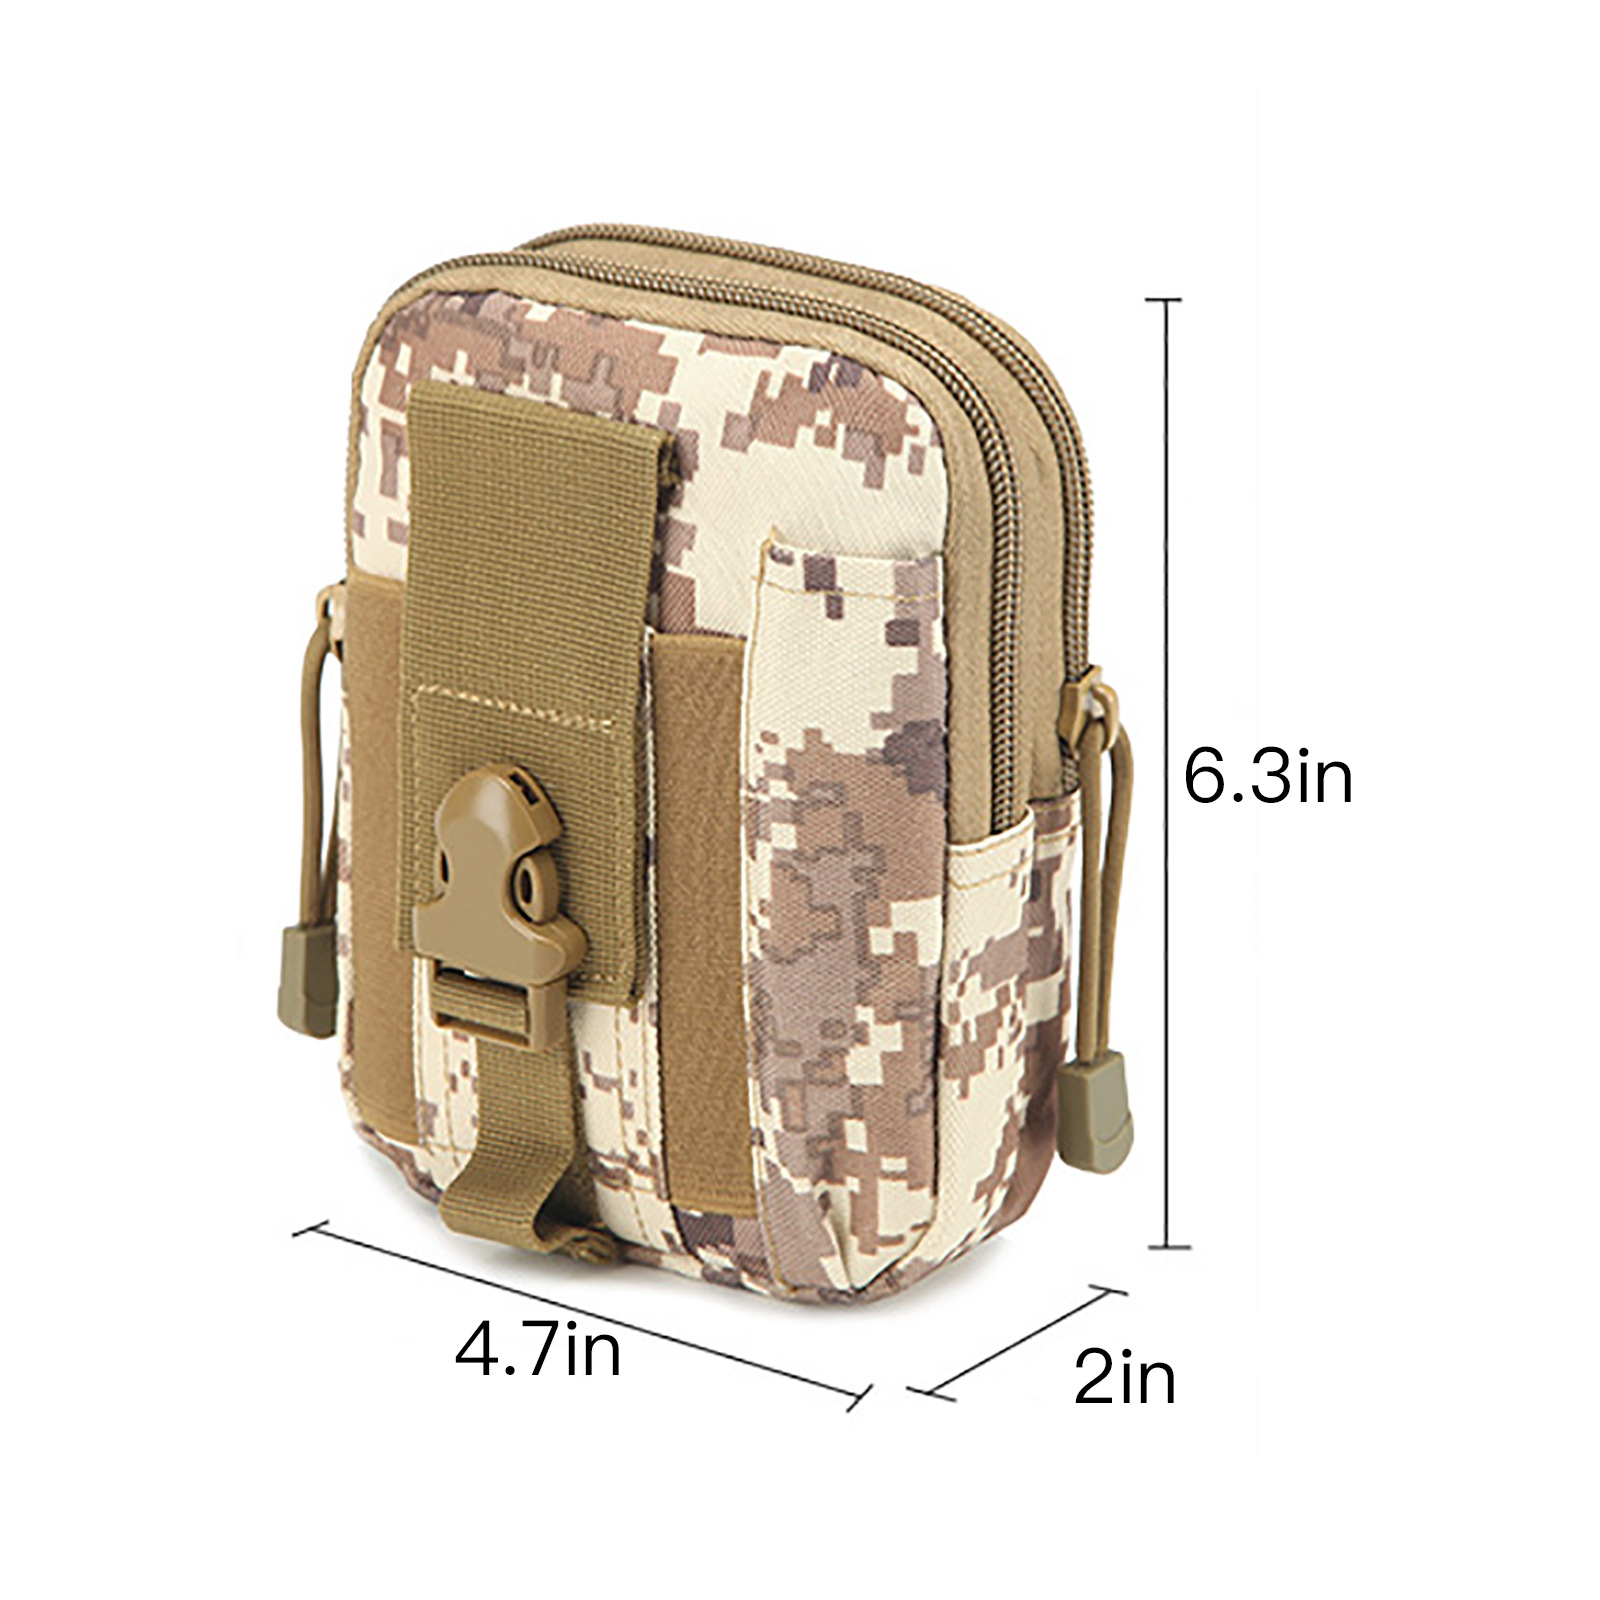 Sugeryy Mobile Phone Bag Pouch Belt Sling Chest Pack Hiking Outdoor Multi-Functional Camo Travel Camping Bags Tactical Backpack - image 5 of 5